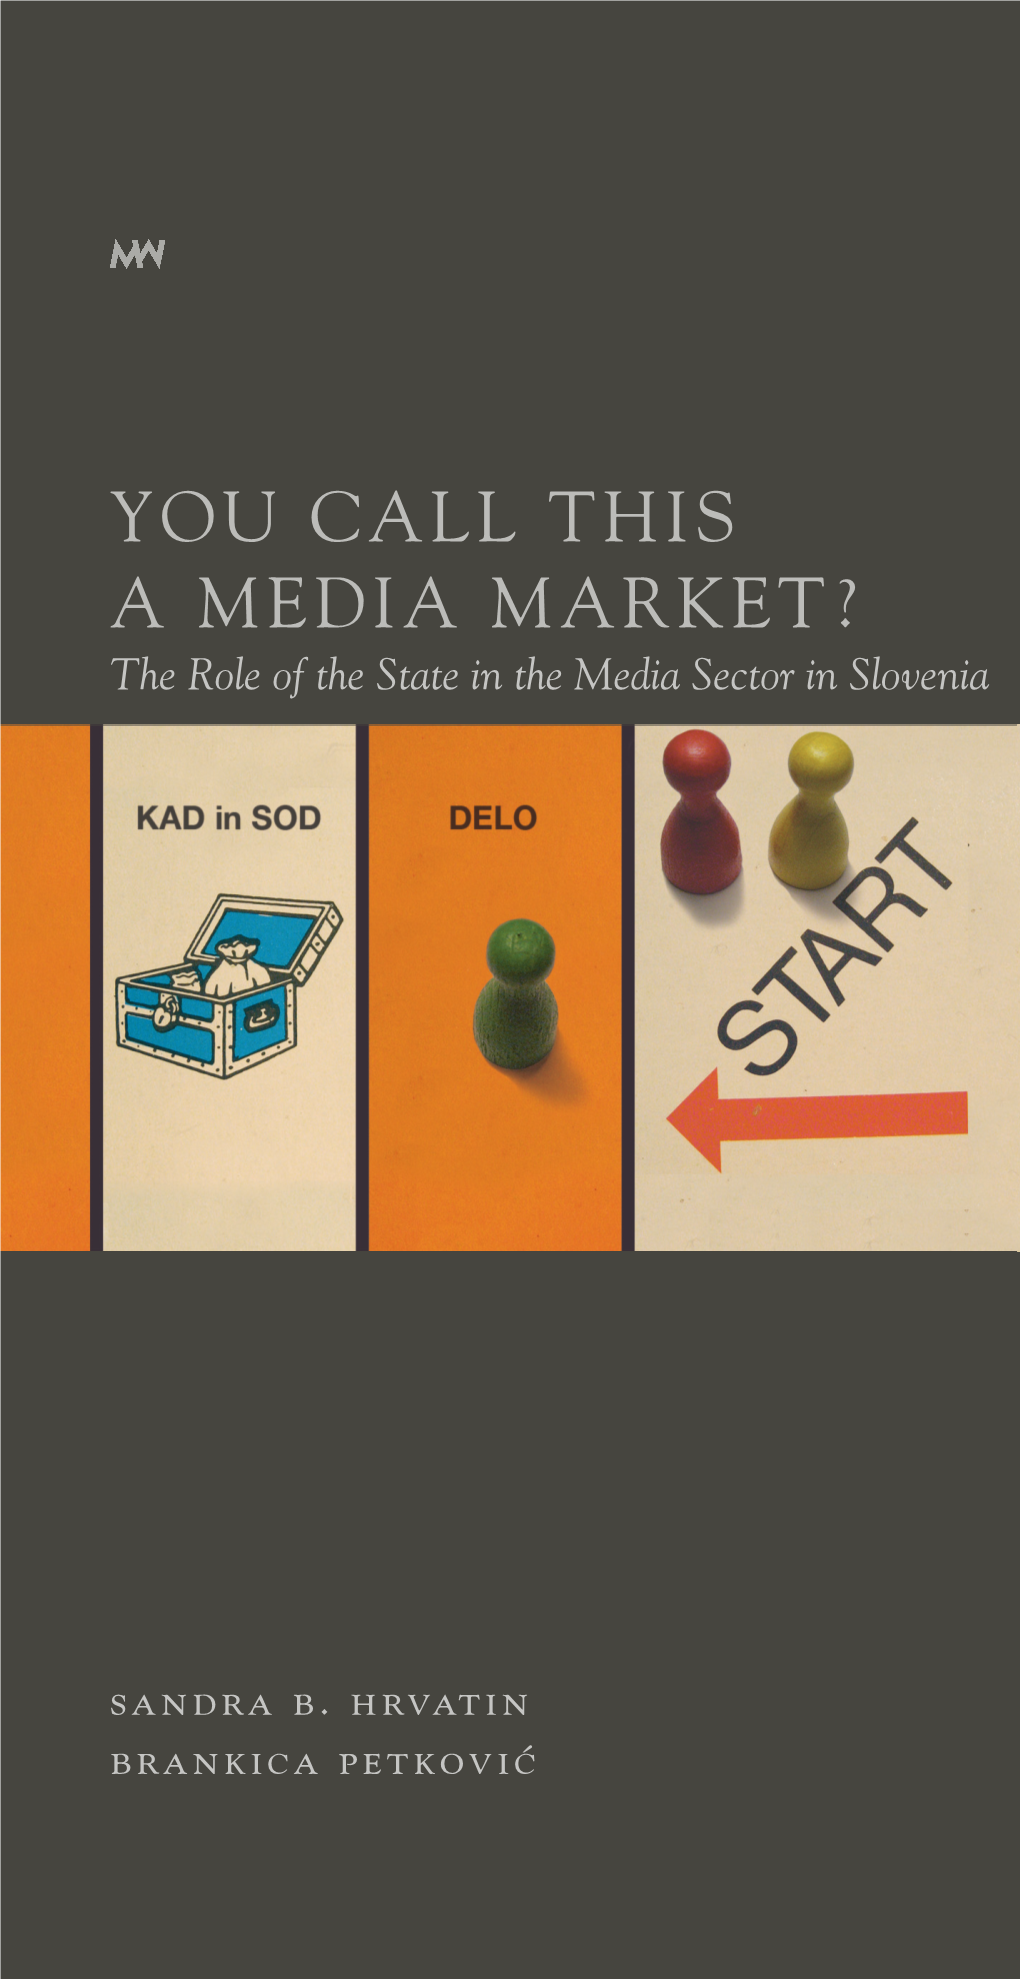 The Role of the State in the Media Sector in Slovenia Authors: Sandra B